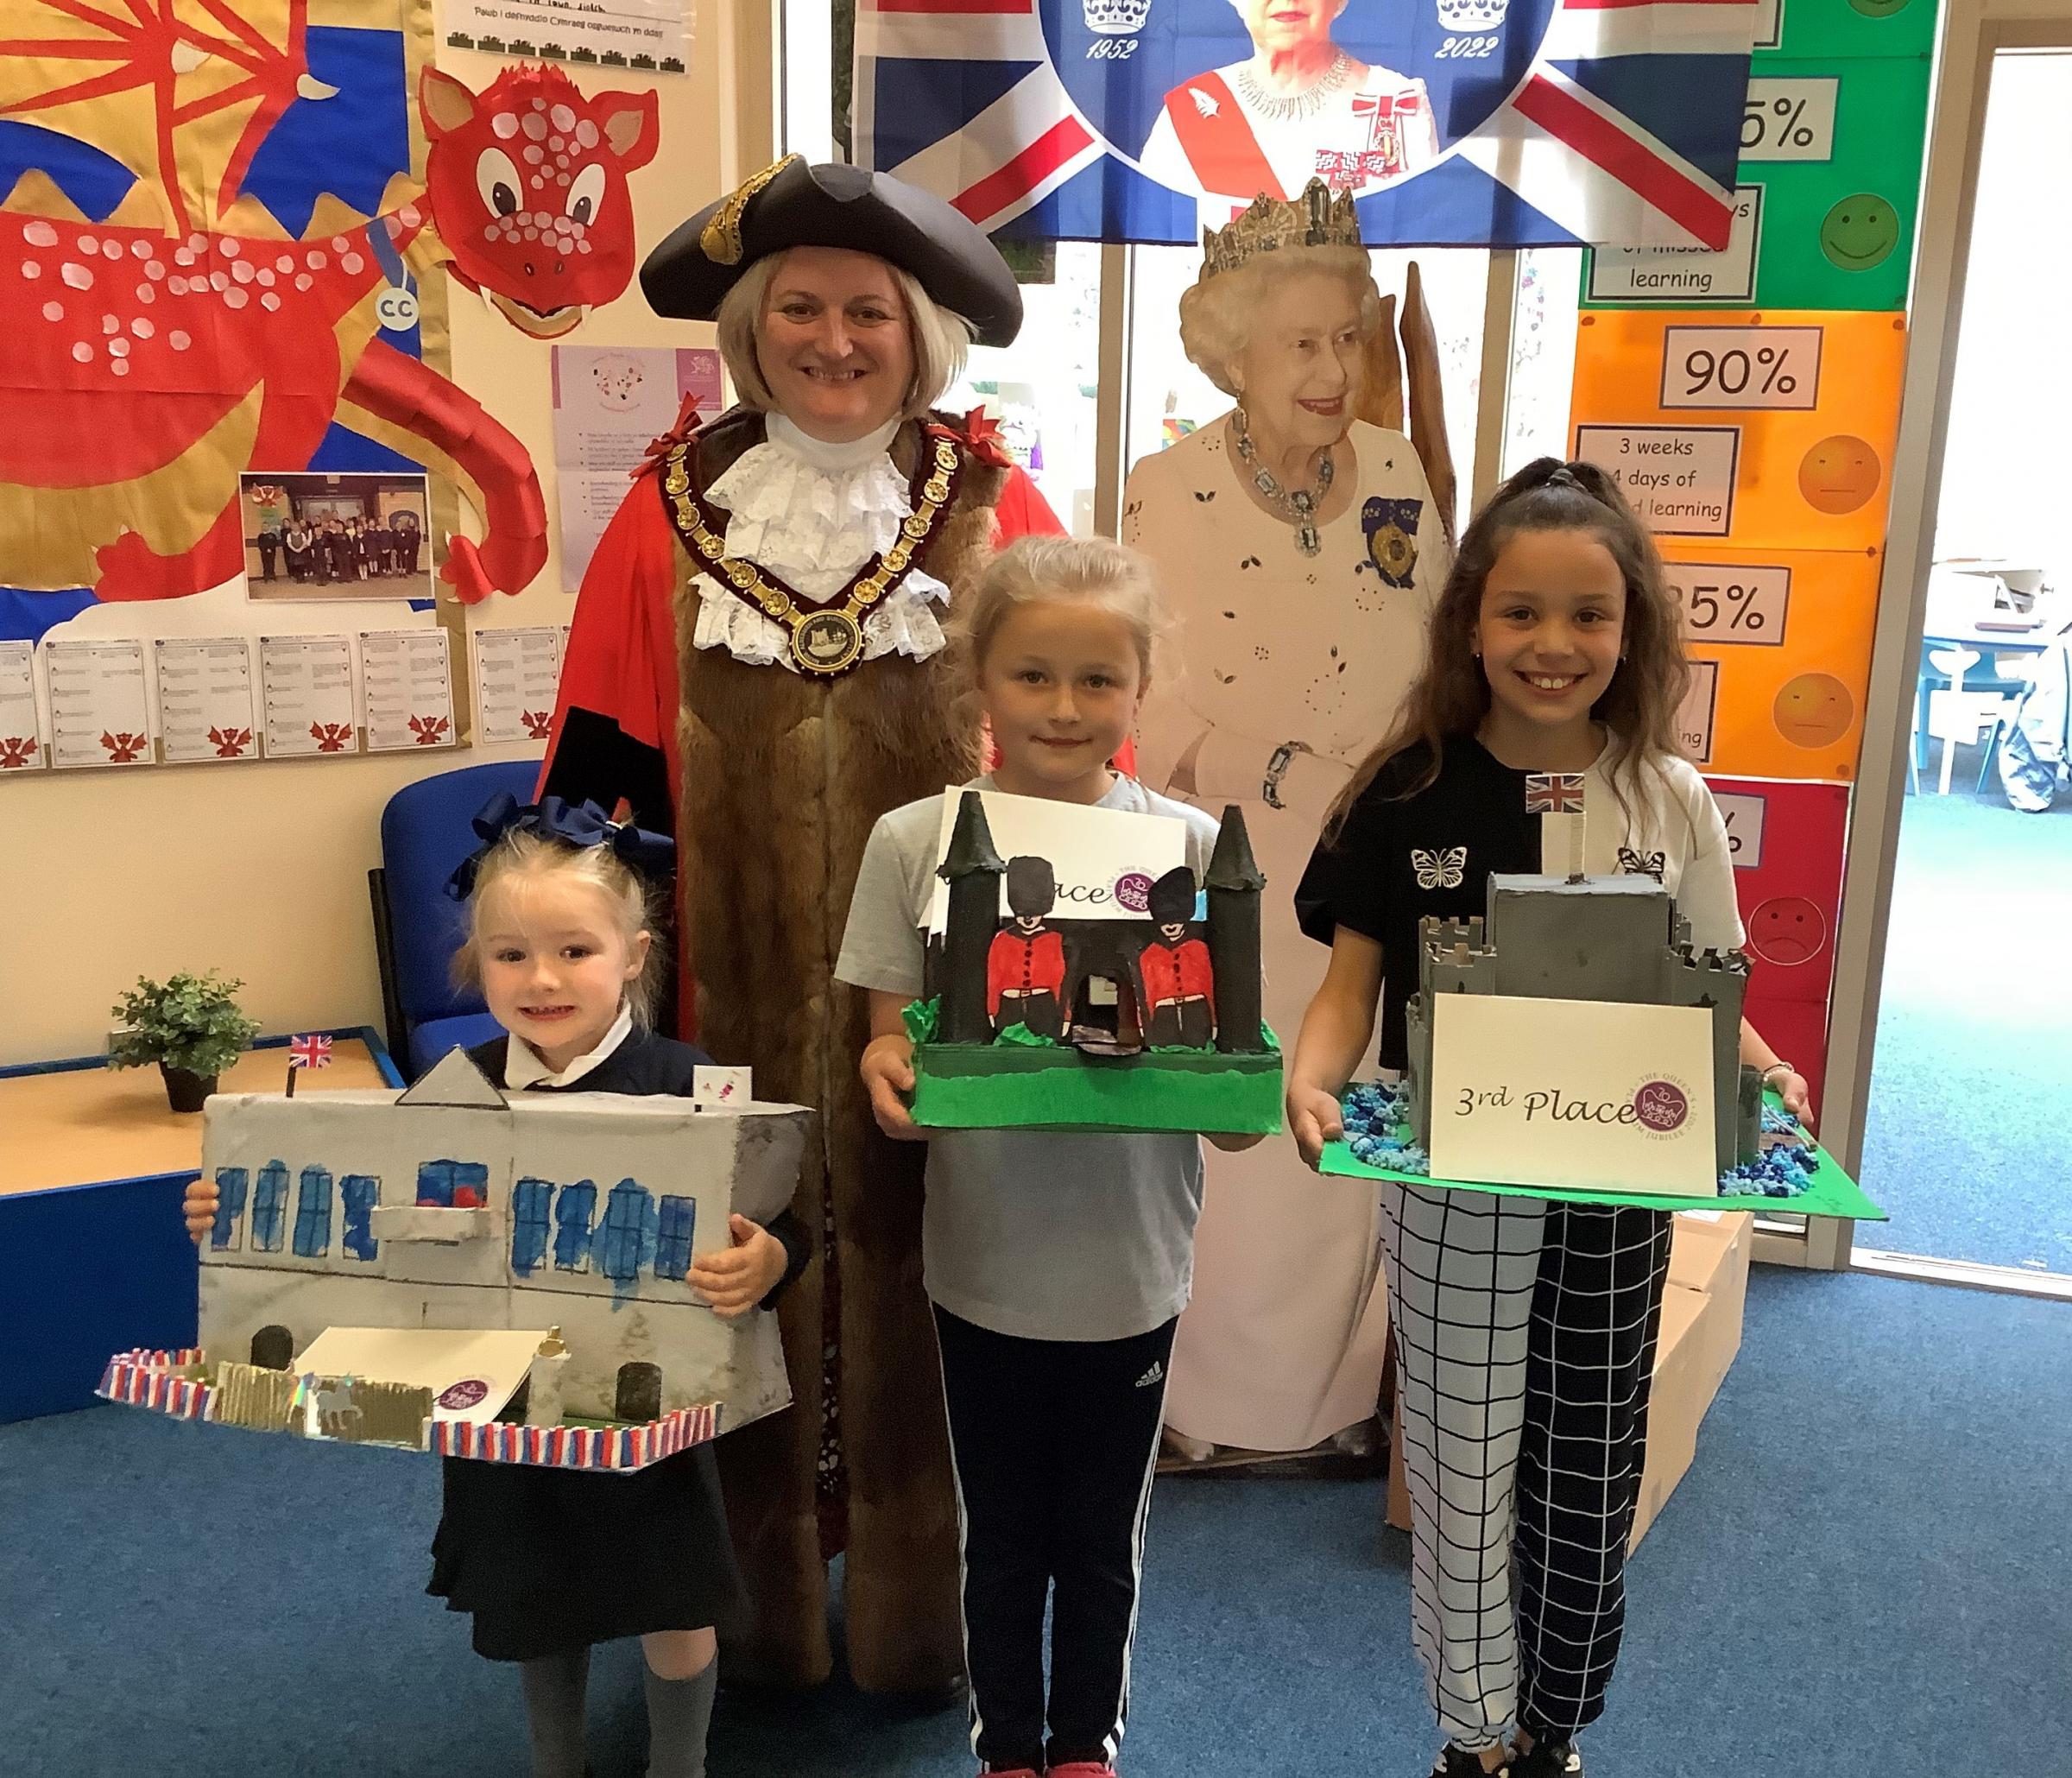 Flint Town Mayor, Cllr Michelle Perfect took part in Jubilee celebrations at Cornist Park School, Flint, including judging craft competitions.